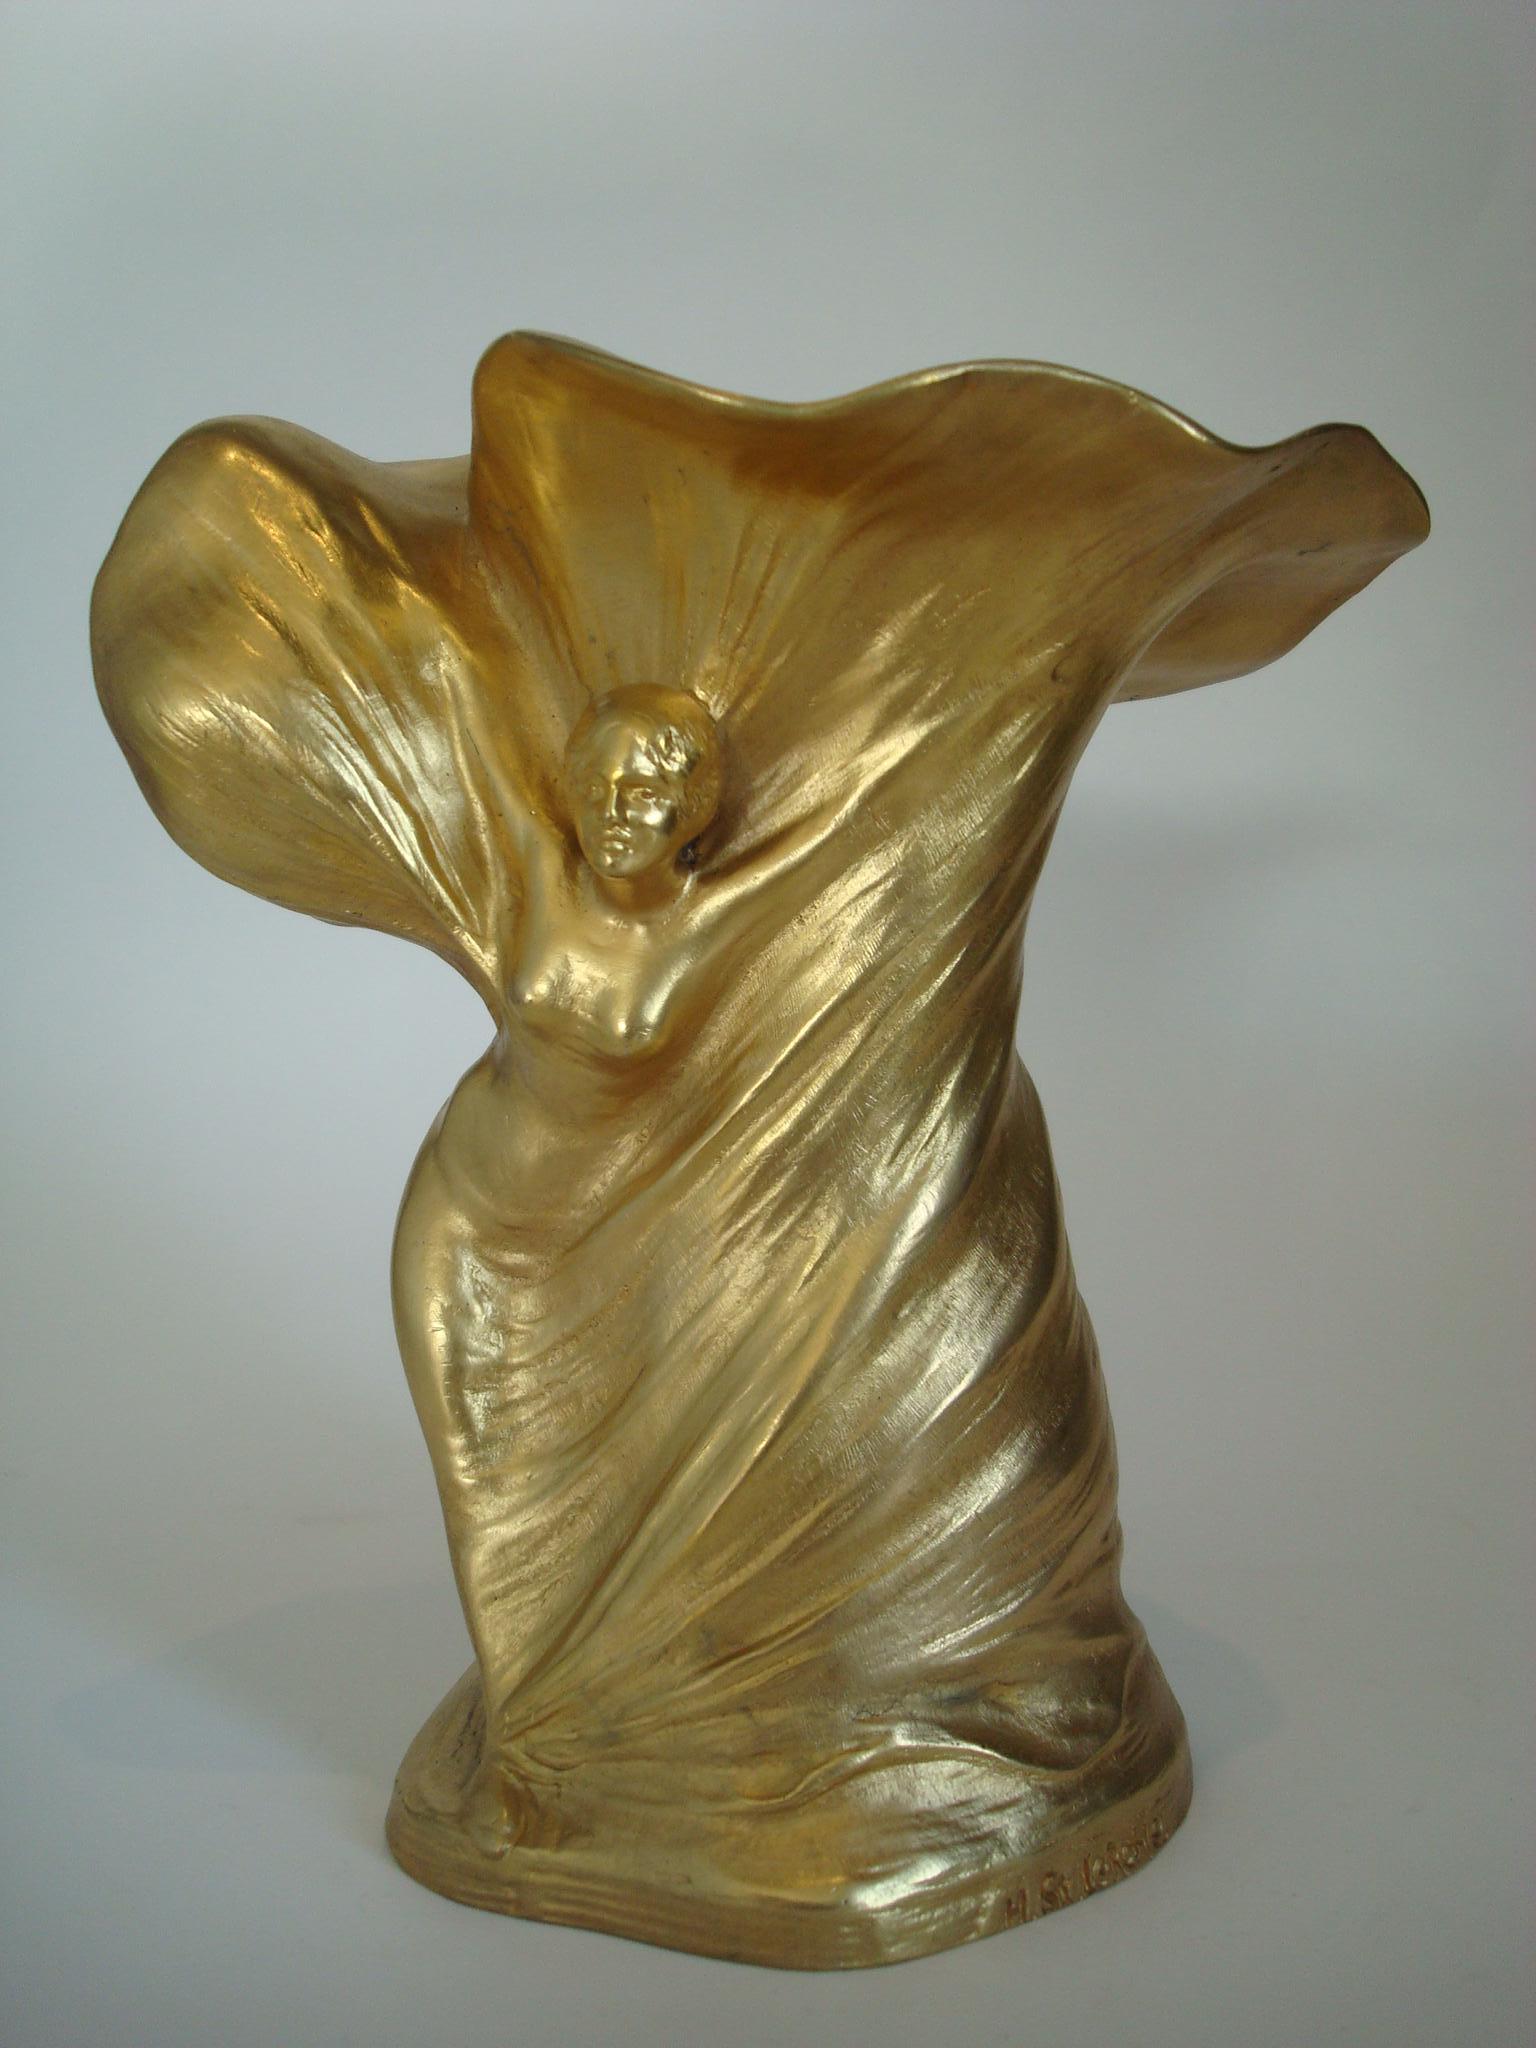 Beautiful Art Nouveau vase in Gilt bronze depicting the famous dancer Loïe Fuller. The vase is signed by the artist Hans Stoltenberg Lerche (1867-1920) and has the Louchet founders' signature, France, circa 1900.

Loie Fuller (born Marie Louise